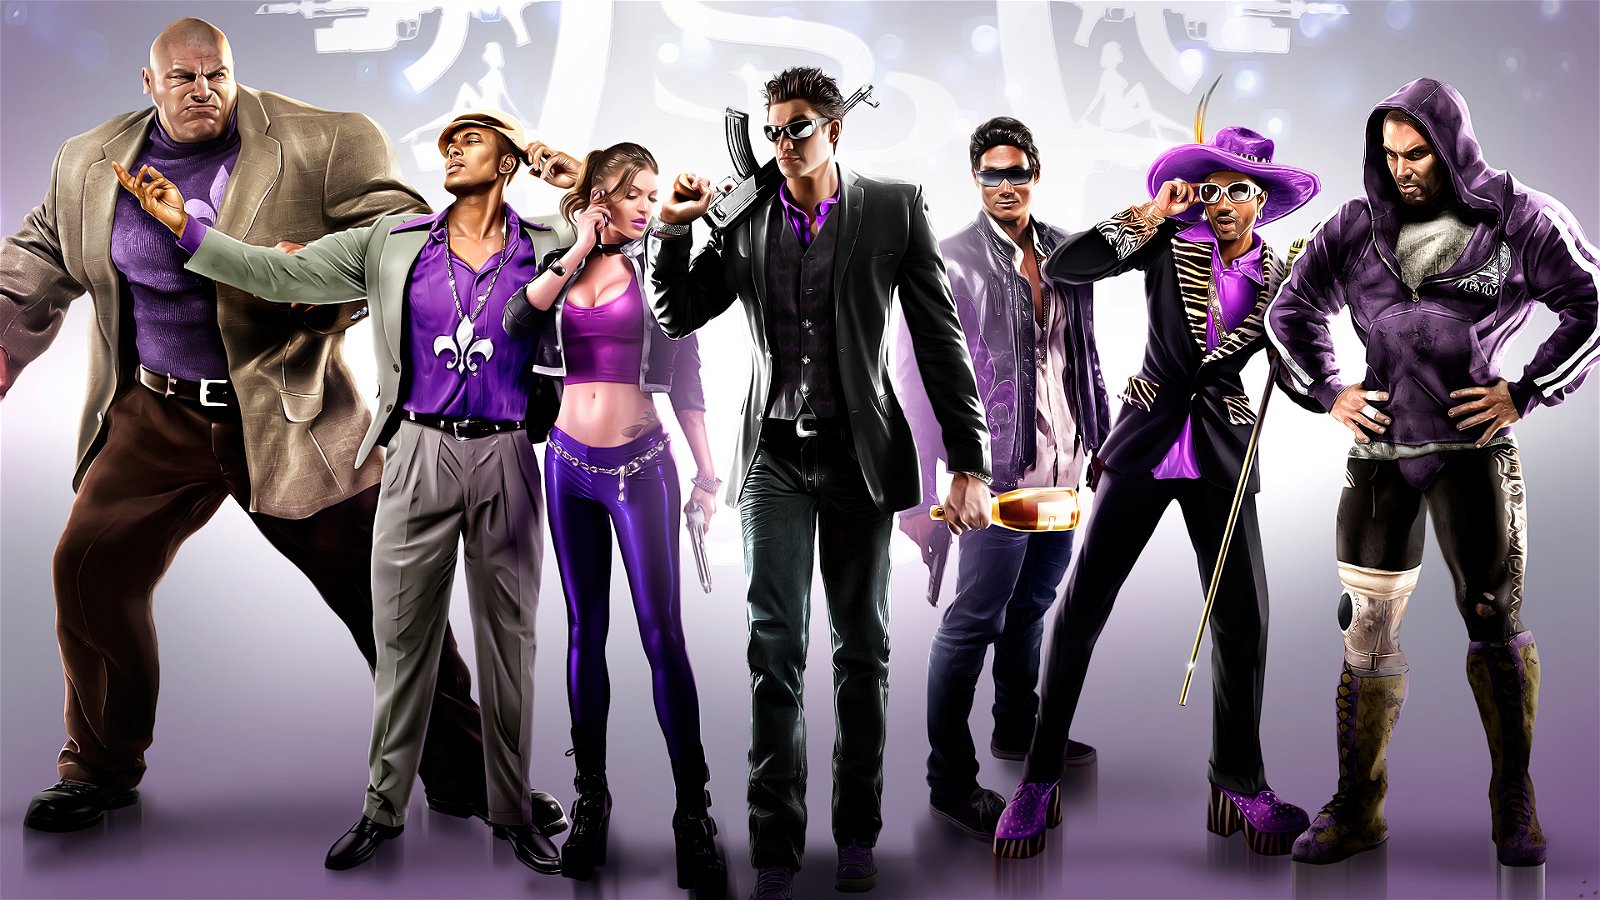 Saints Row The Third Saints Row: The Third - The Full Package, Volition